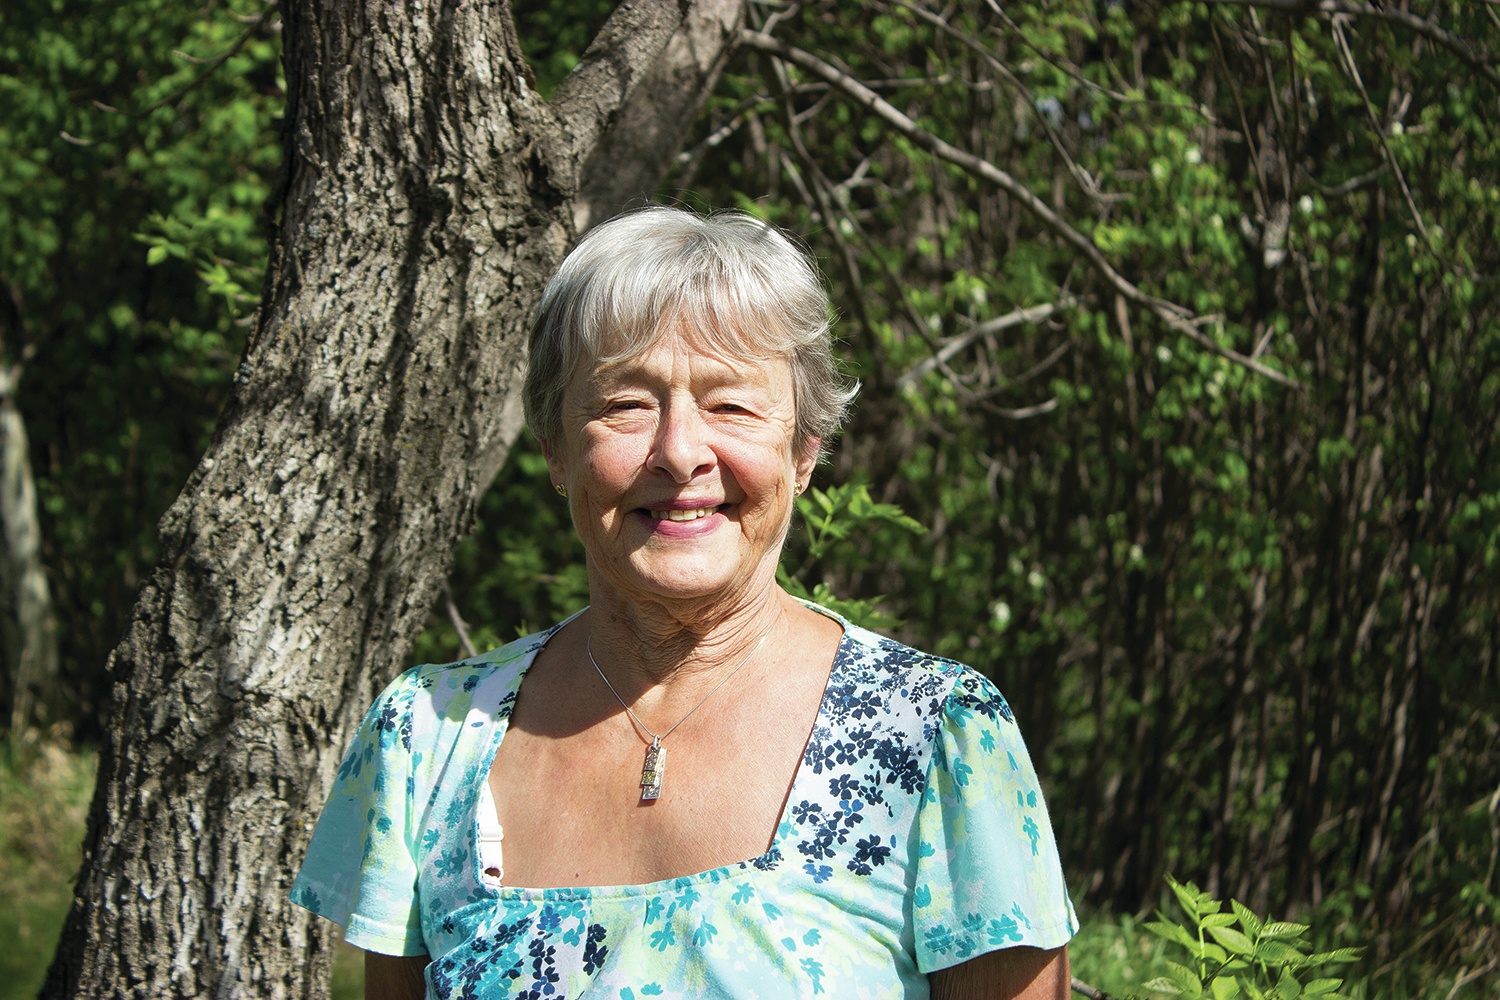 RECOGNITION - Evelyn Small is involved in many organizations including the Lending Cupboard